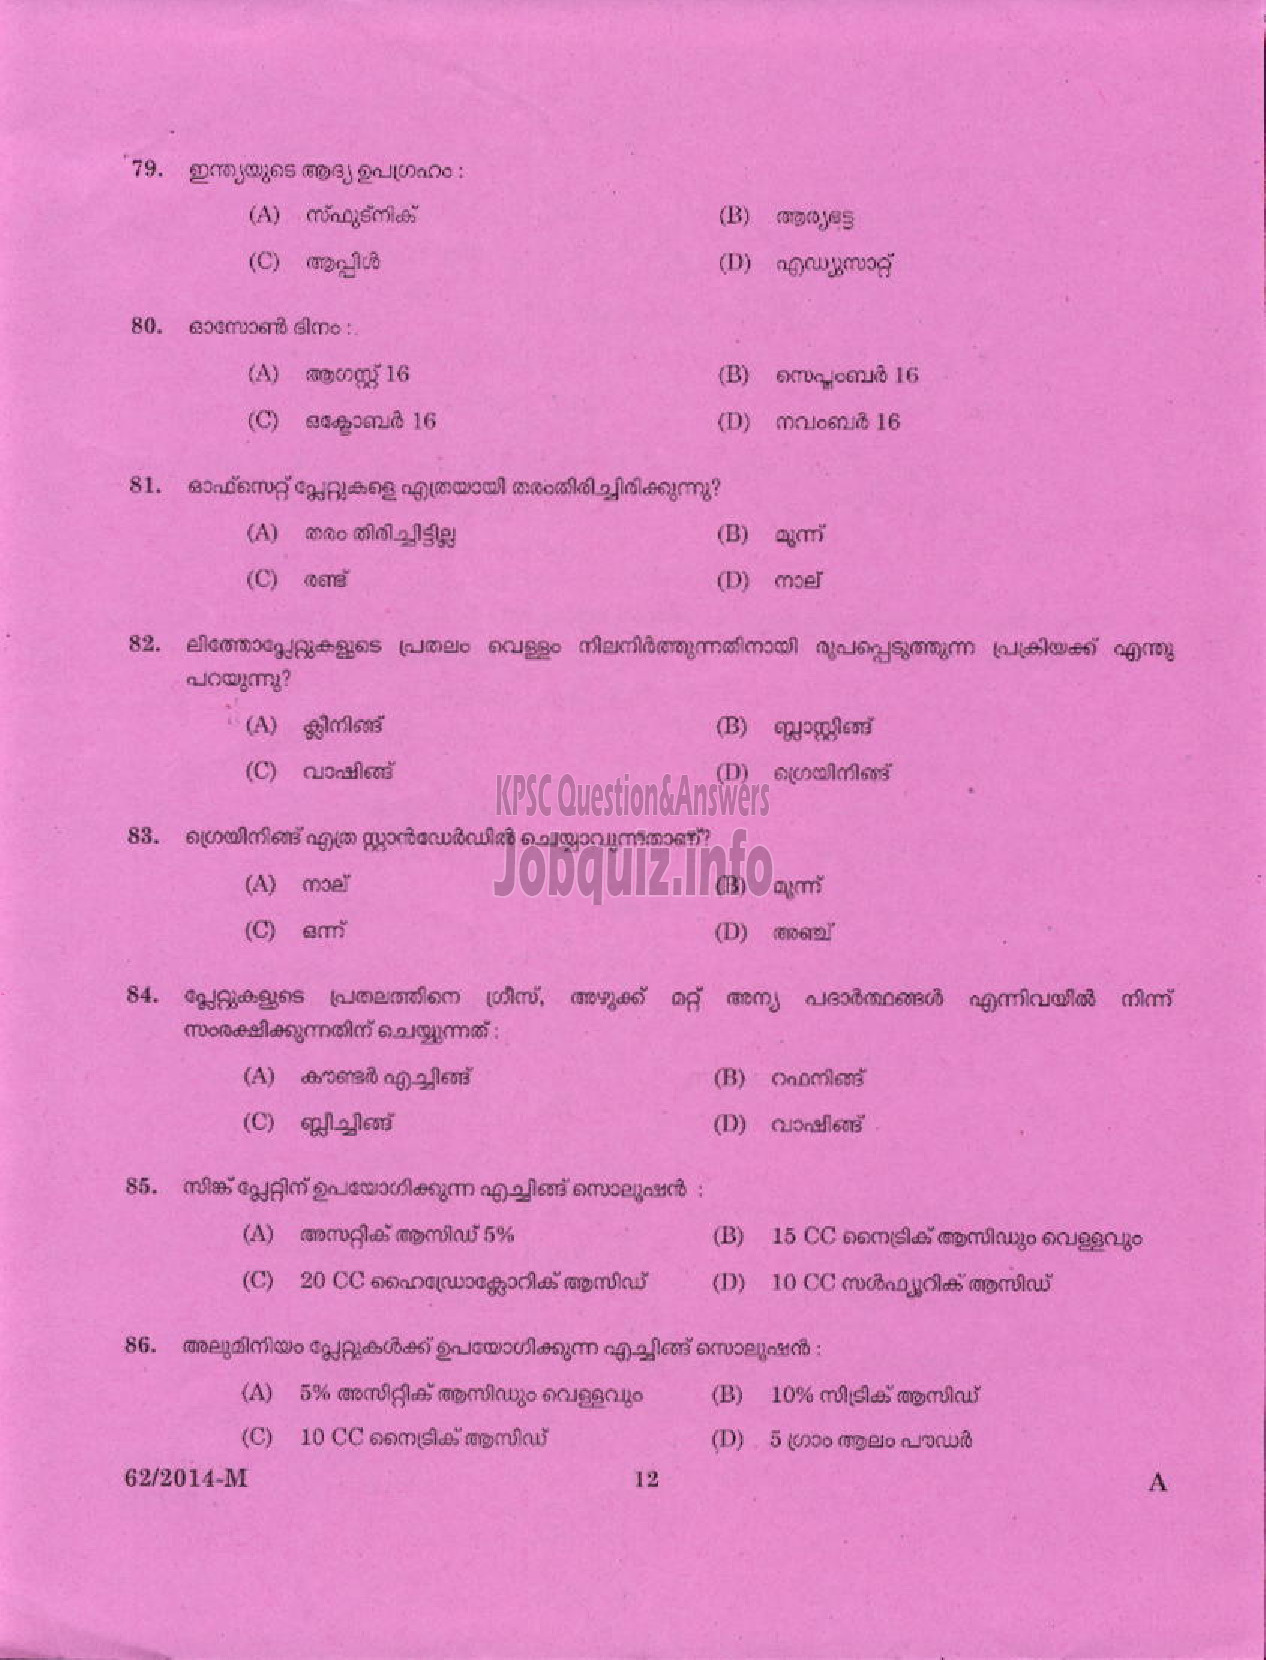 Kerala PSC Question Paper - ATTENDER PLATE CLEANING SURVEY AND LAND RECORDS TVPM ( Malayalam ) -10